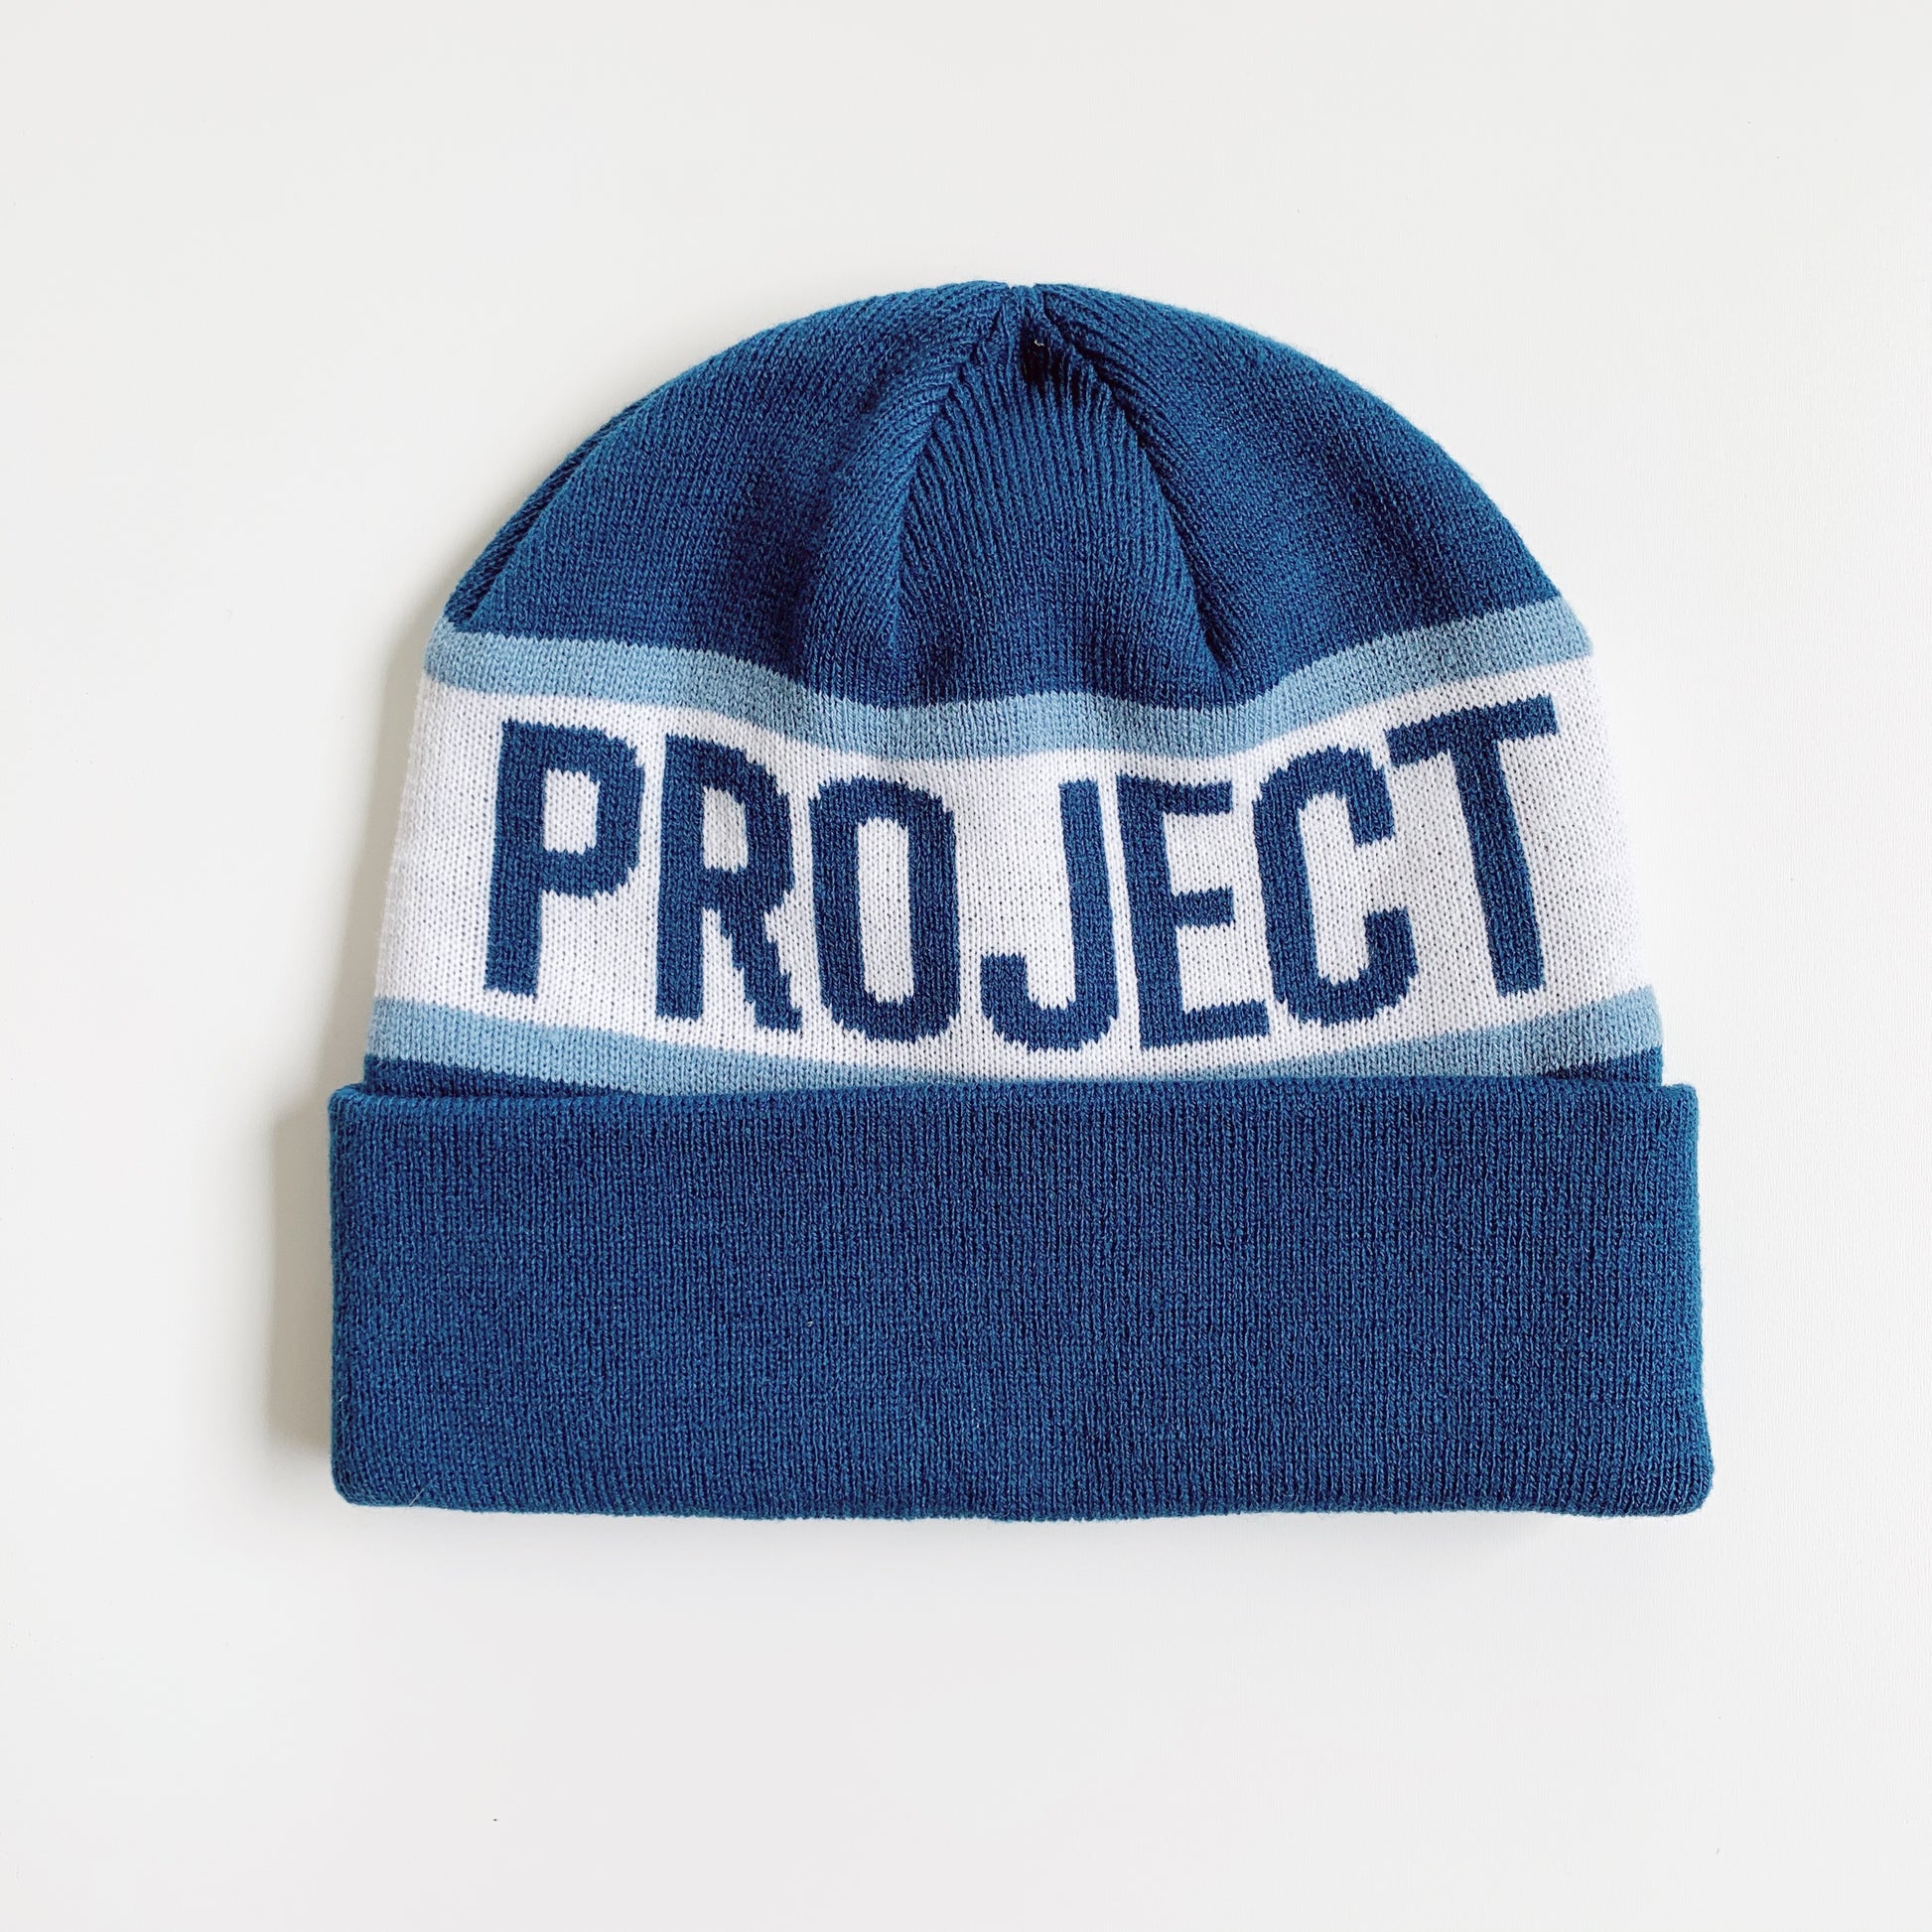 Navy Non-GMO Project beanie other side  with  phrase "PROJECT" 